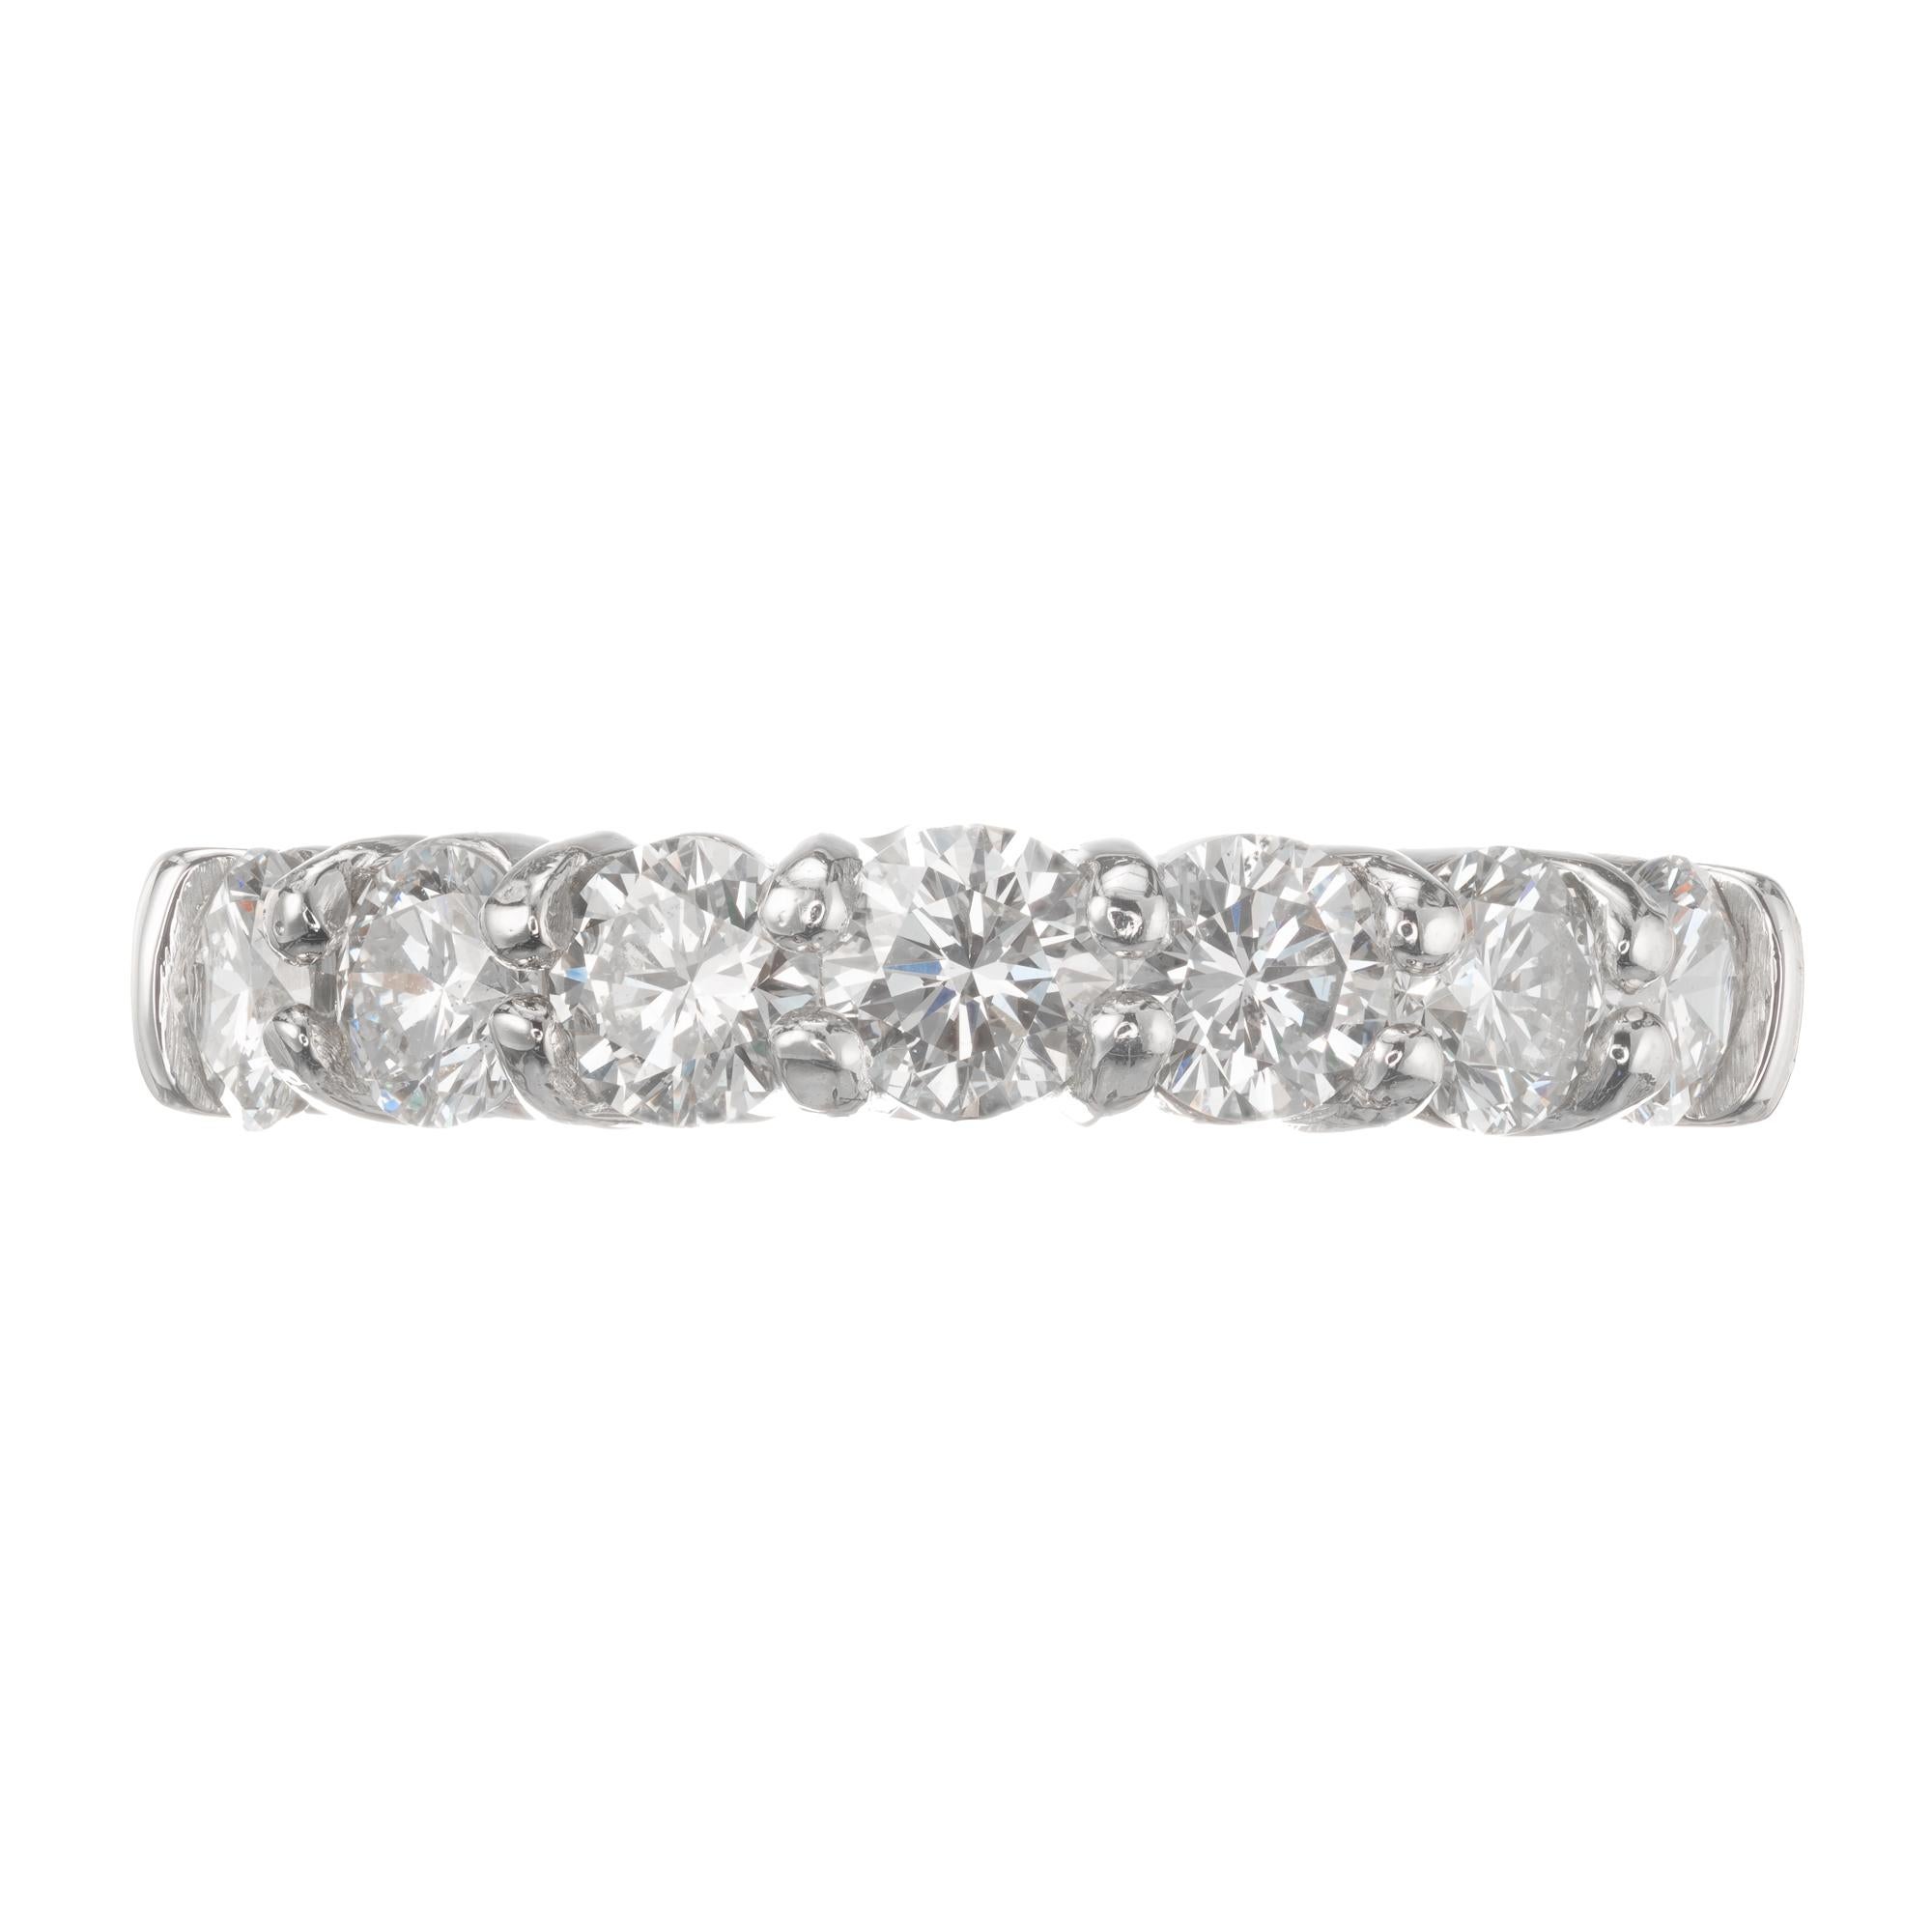 7 round diamond wedding band ring. Handmade platinum band designed in the Peter Suchy Workshop 

7 round brilliant cut G SI diamonds, Approximate 1.53cts
Size 6.75 and sizable 
Platinum 
Stamped: PLAT
6.8 grams
Width at top: 4.1mm
Height at top: